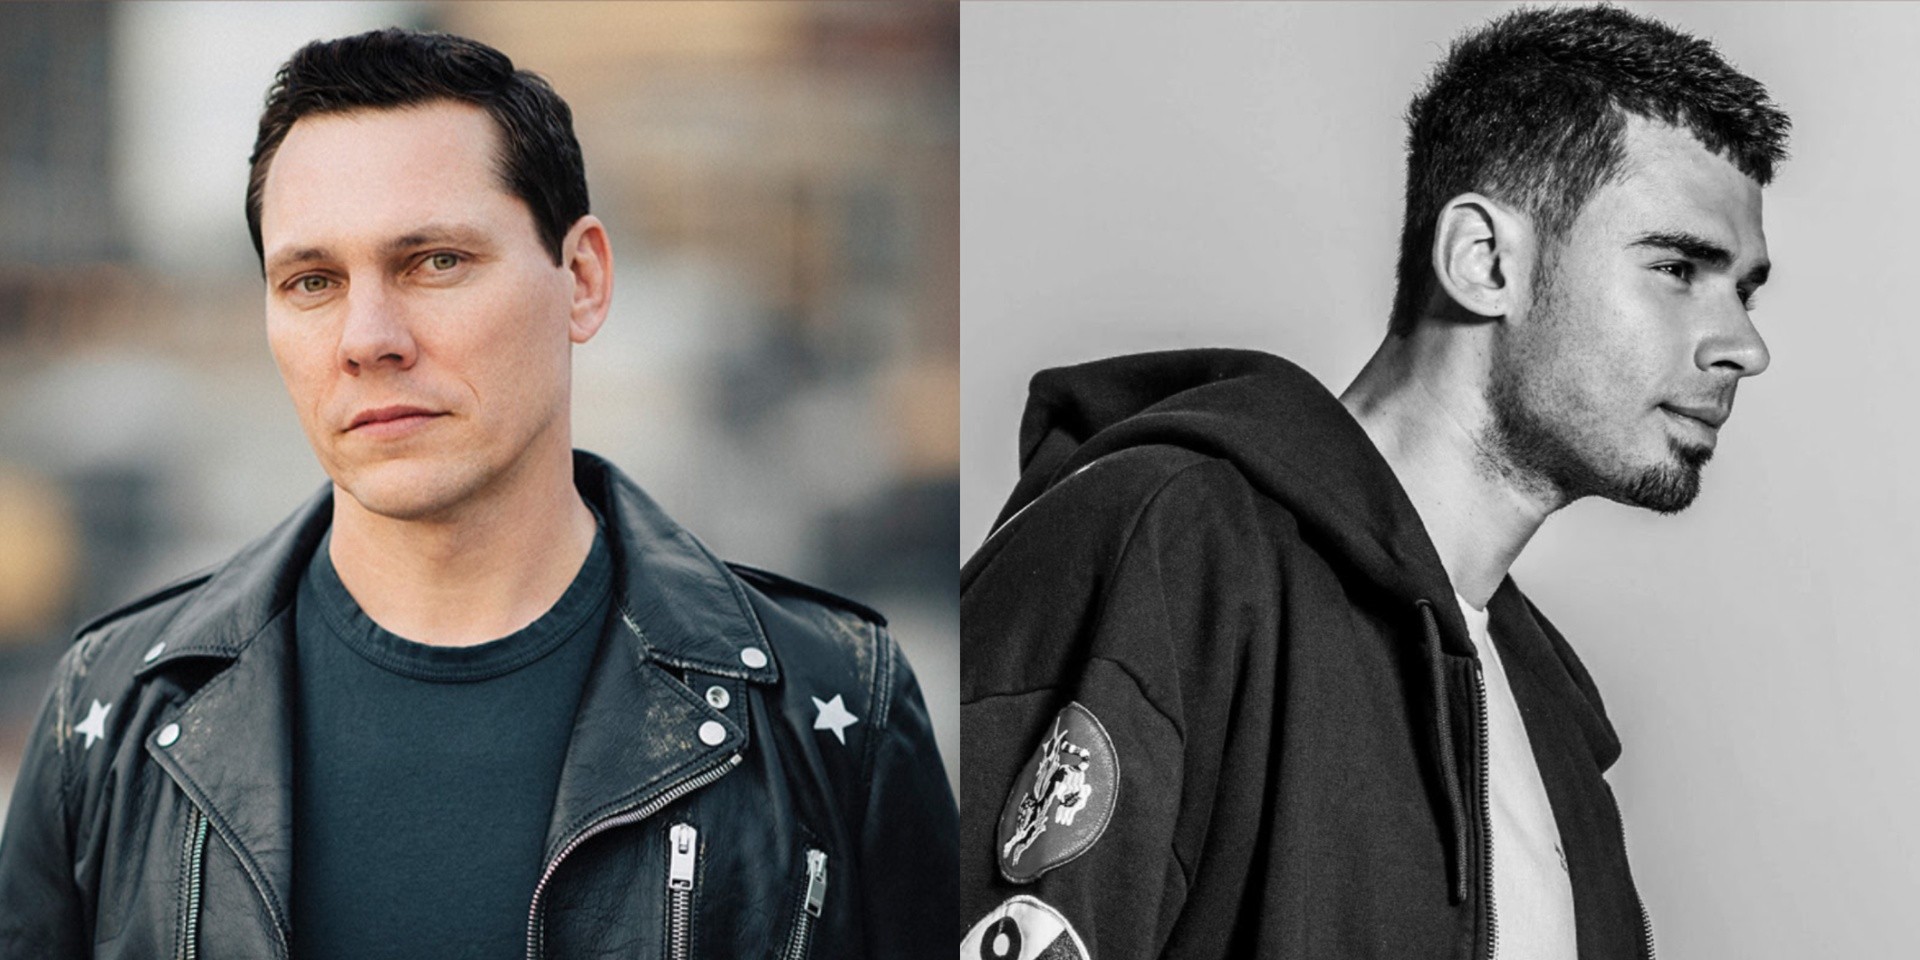 Tiesto and Afrojack to perform at Marquee Singapore opening